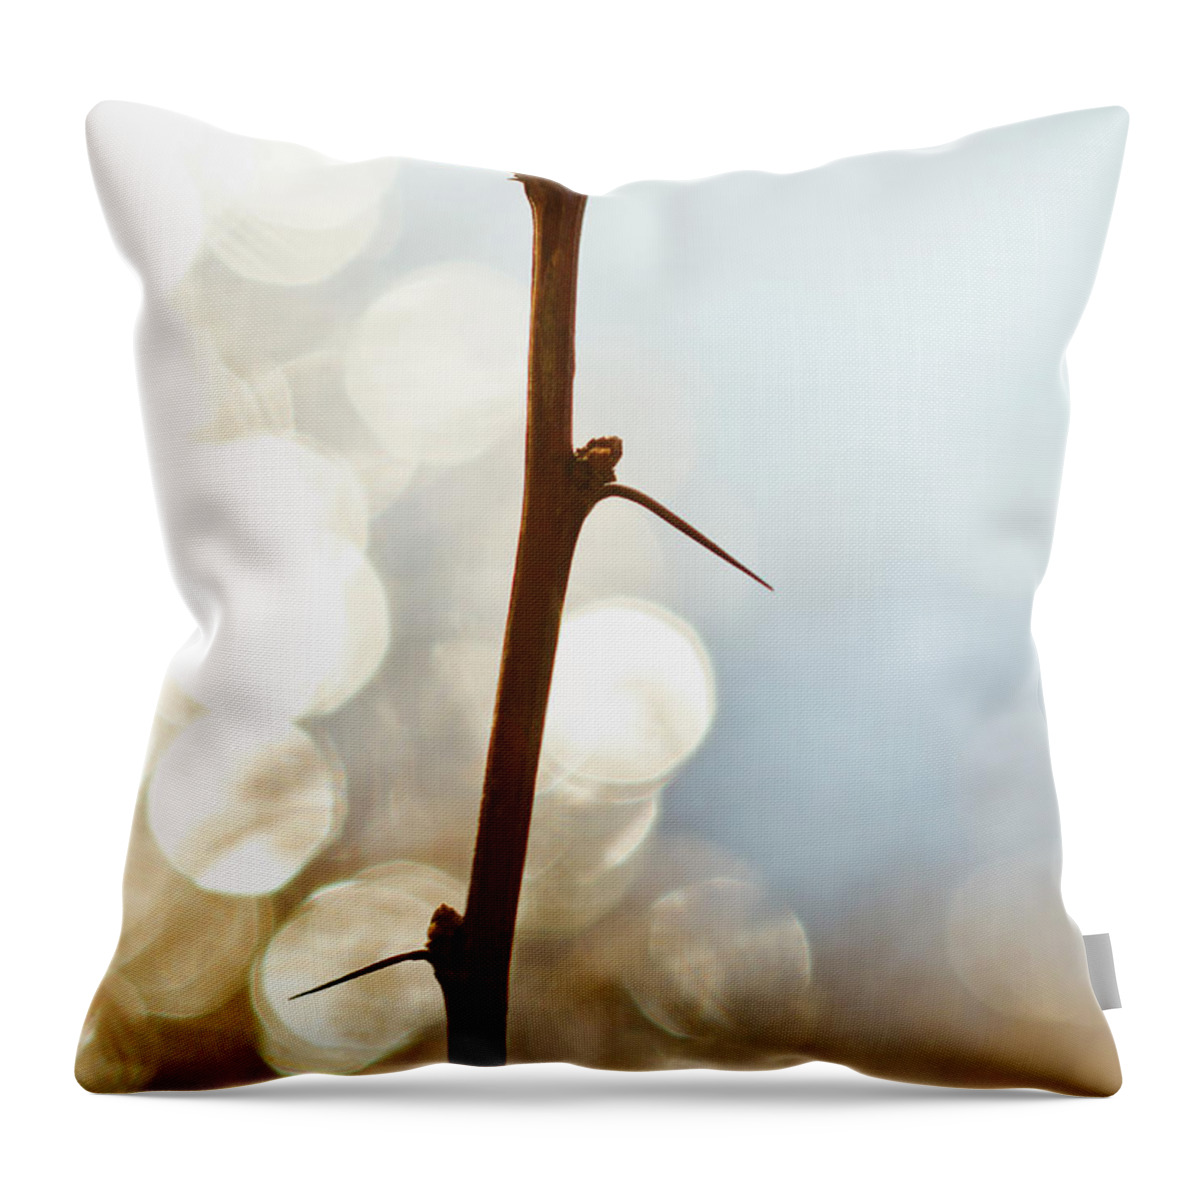 Tranquility Throw Pillow featuring the photograph Usa, Pennsylvania, Poconos, Close-up Of by Tetra Images